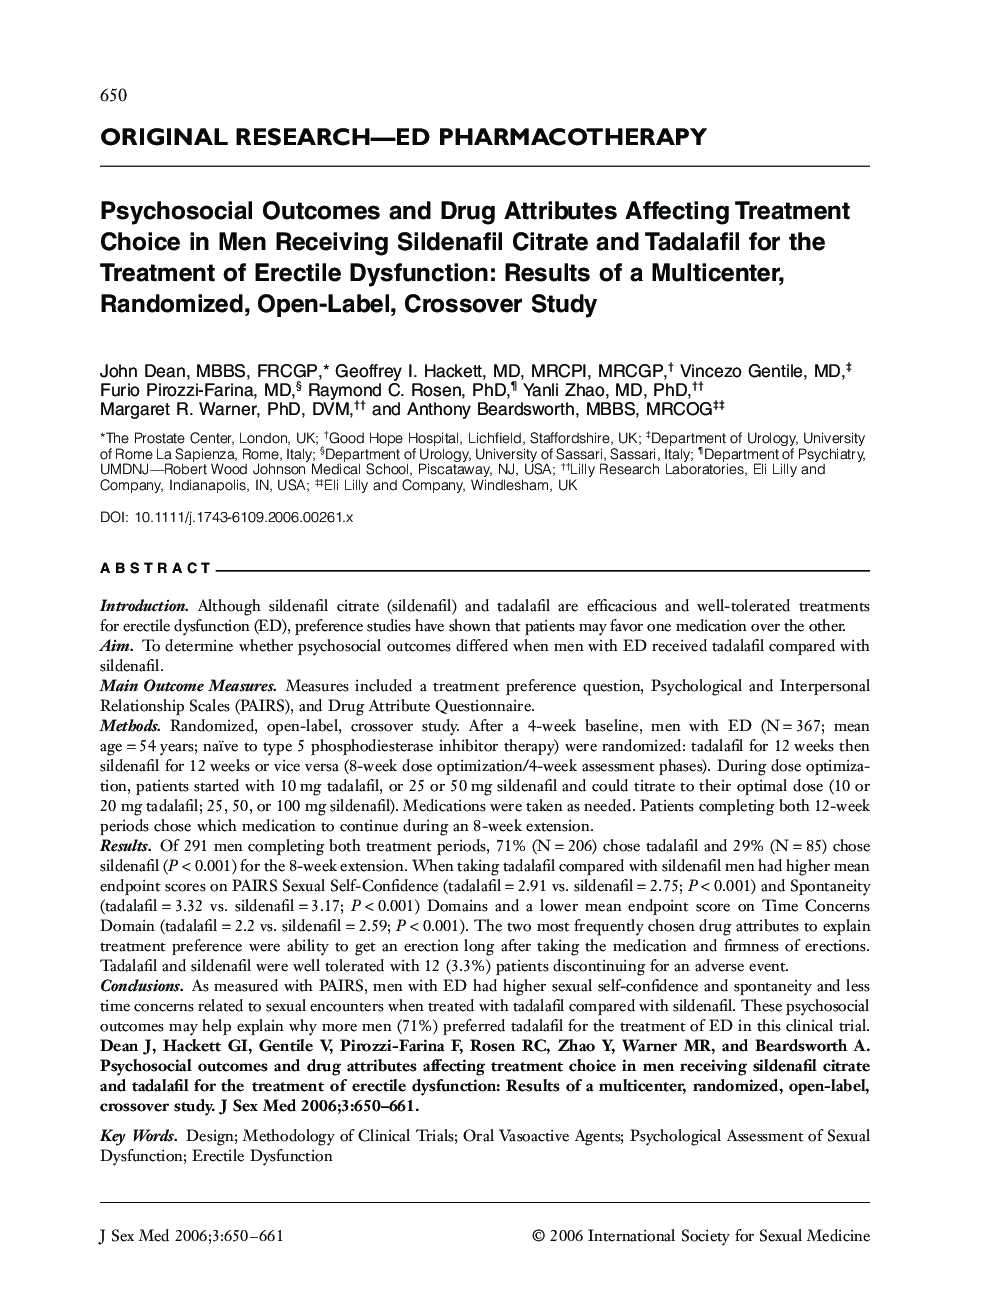 ORIGINAL RESEARCH-ED PHARMACOTHERAPY: Psychosocial Outcomes and Drug Attributes Affecting Treatment Choice in Men Receiving Sildenafil Citrate and Tadalafil for the Treatment of Erectile Dysfunction: Results of a Multicenter, Randomized, OpenâLabel, Cro